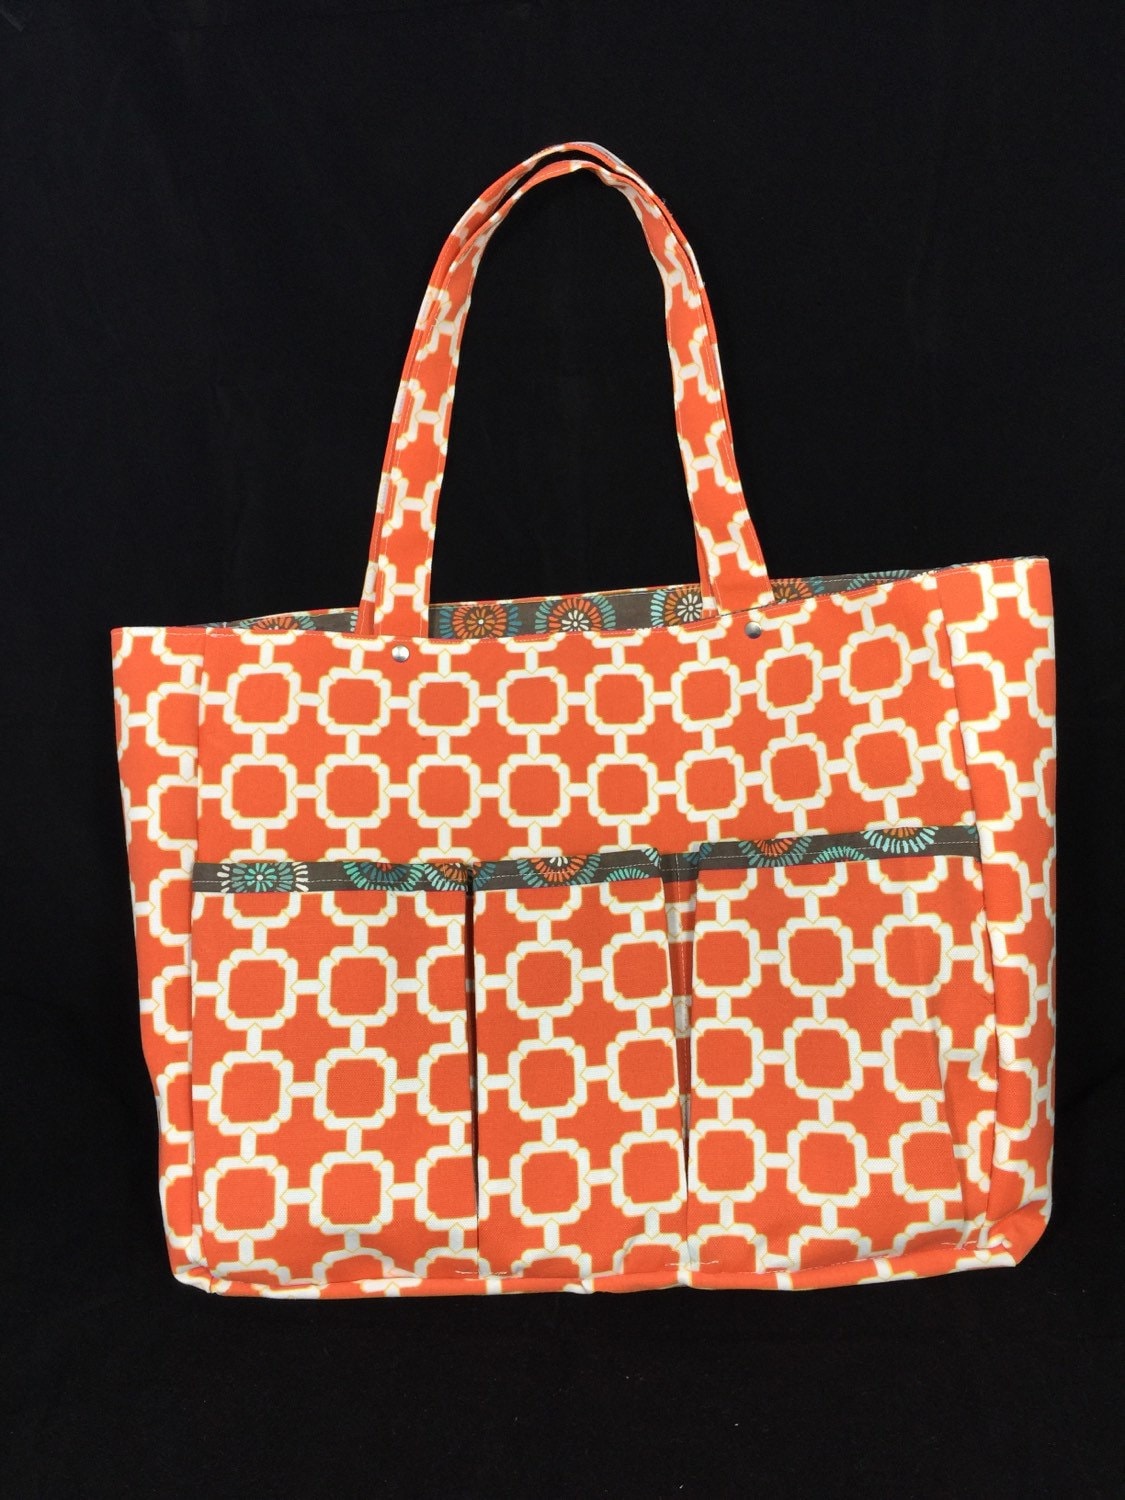 Large Tote with Pockets Beach Tote School Tote Diaper Bag